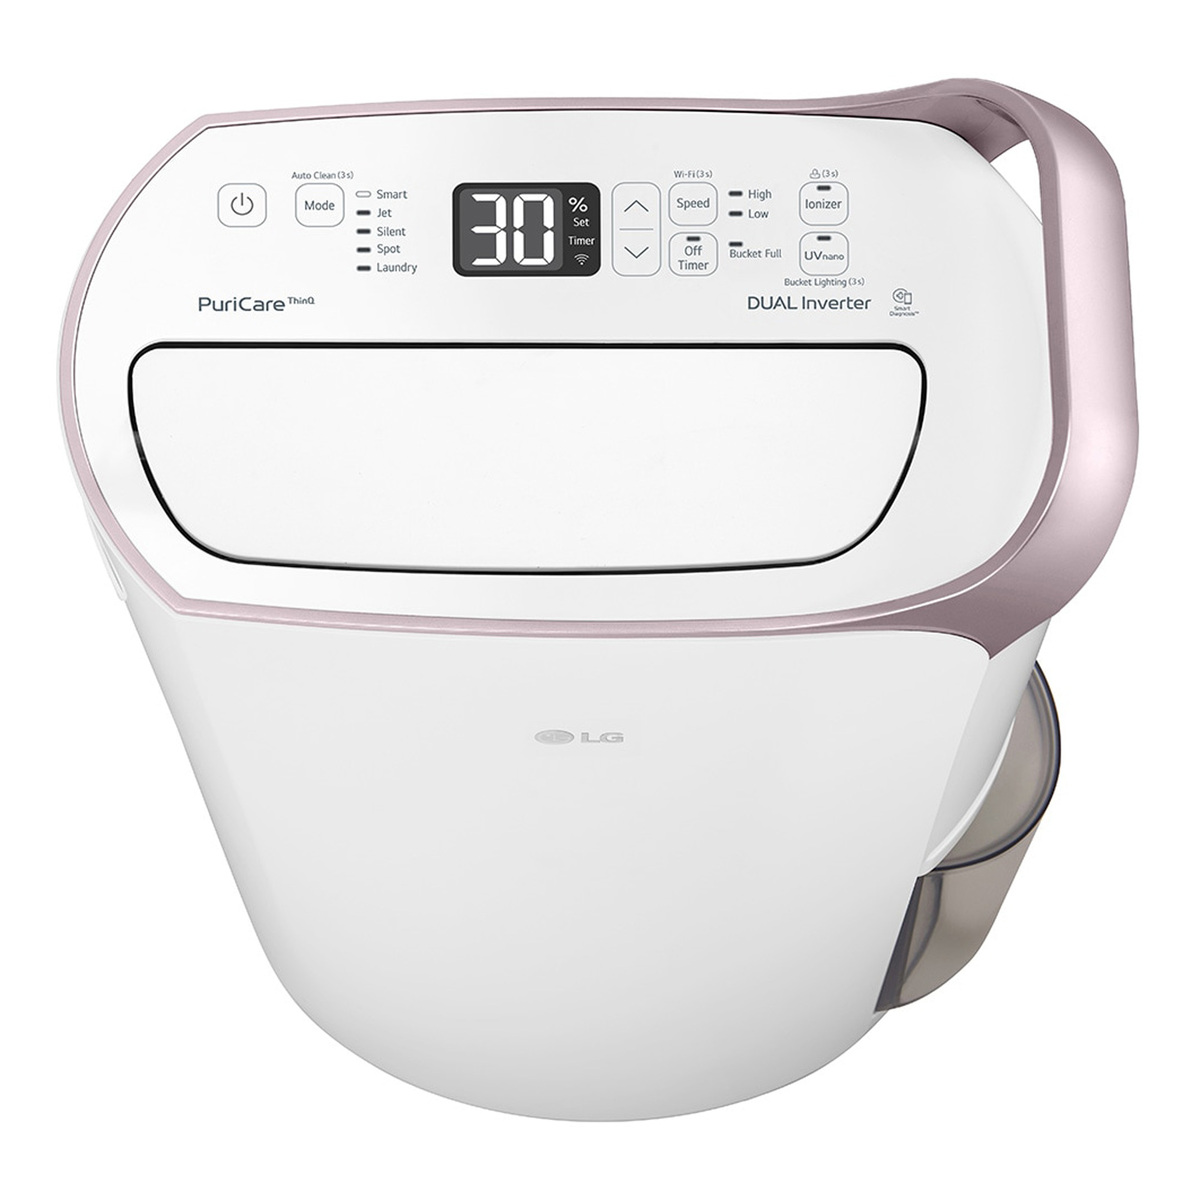 LG Inverter Smart Dehumidifier with Ionizer, 19 L, Rose Gold, MD19GQGE0